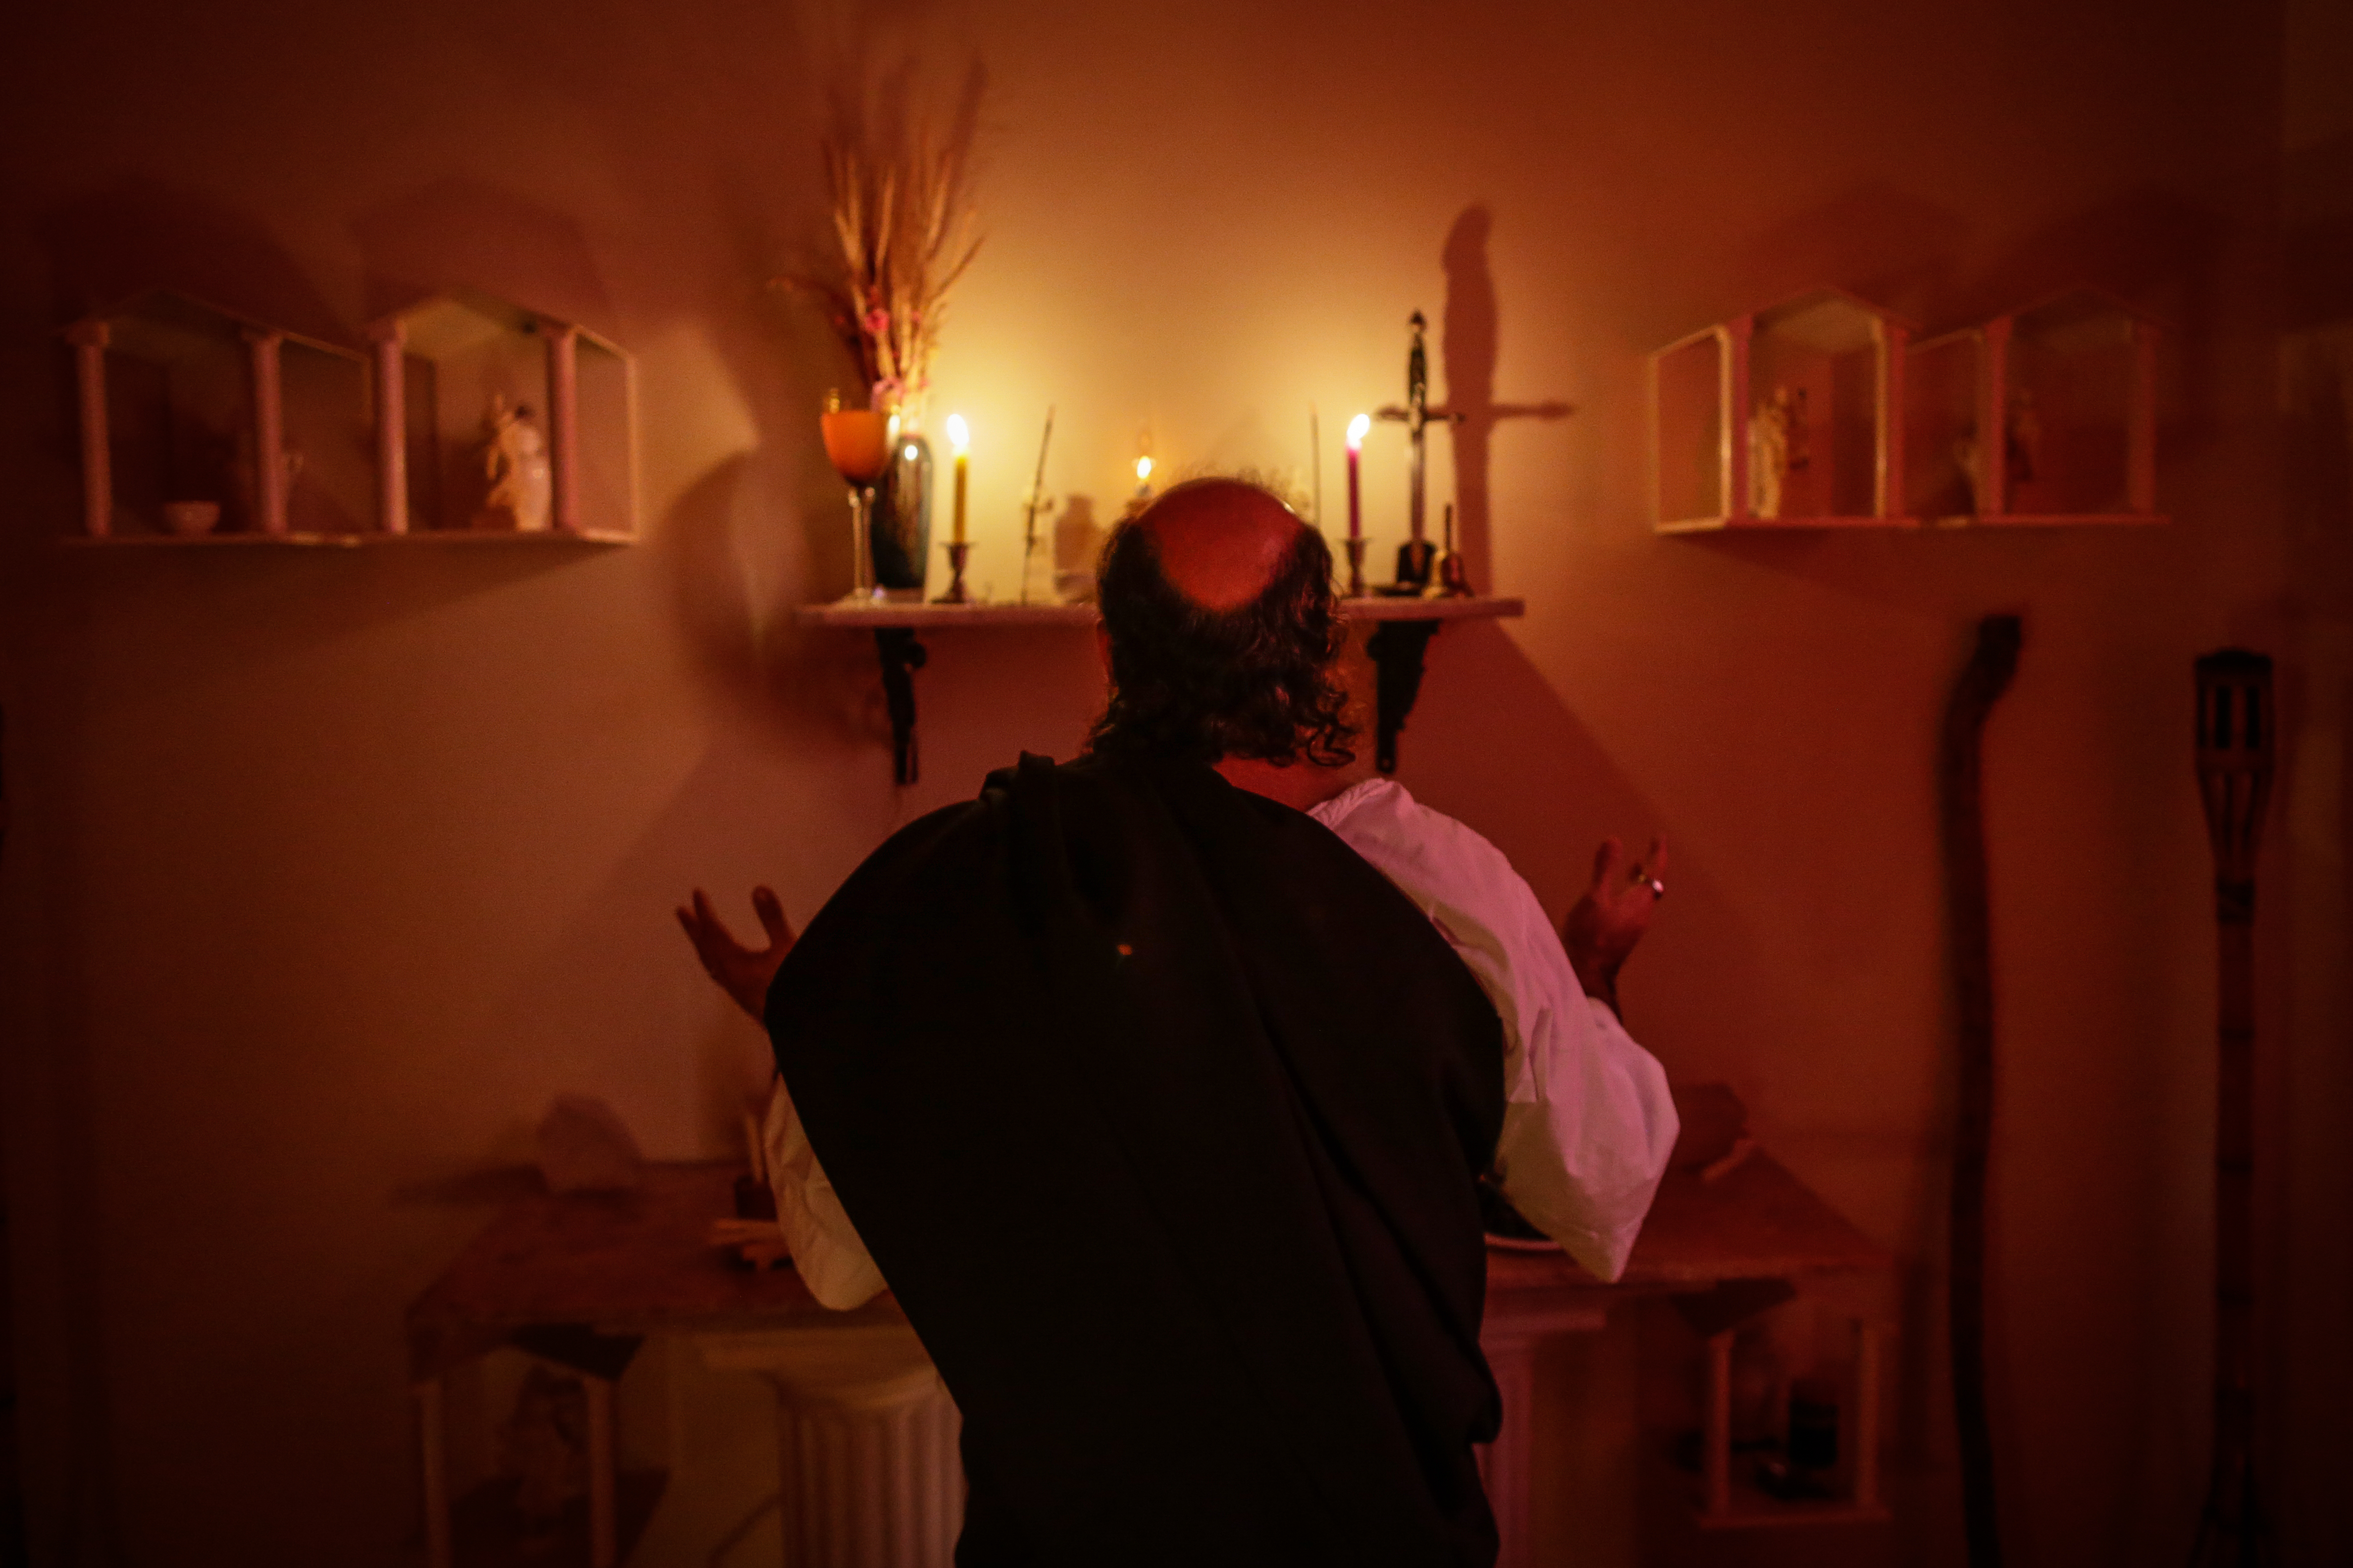 An Old Man Worshiping In Front Of Candles